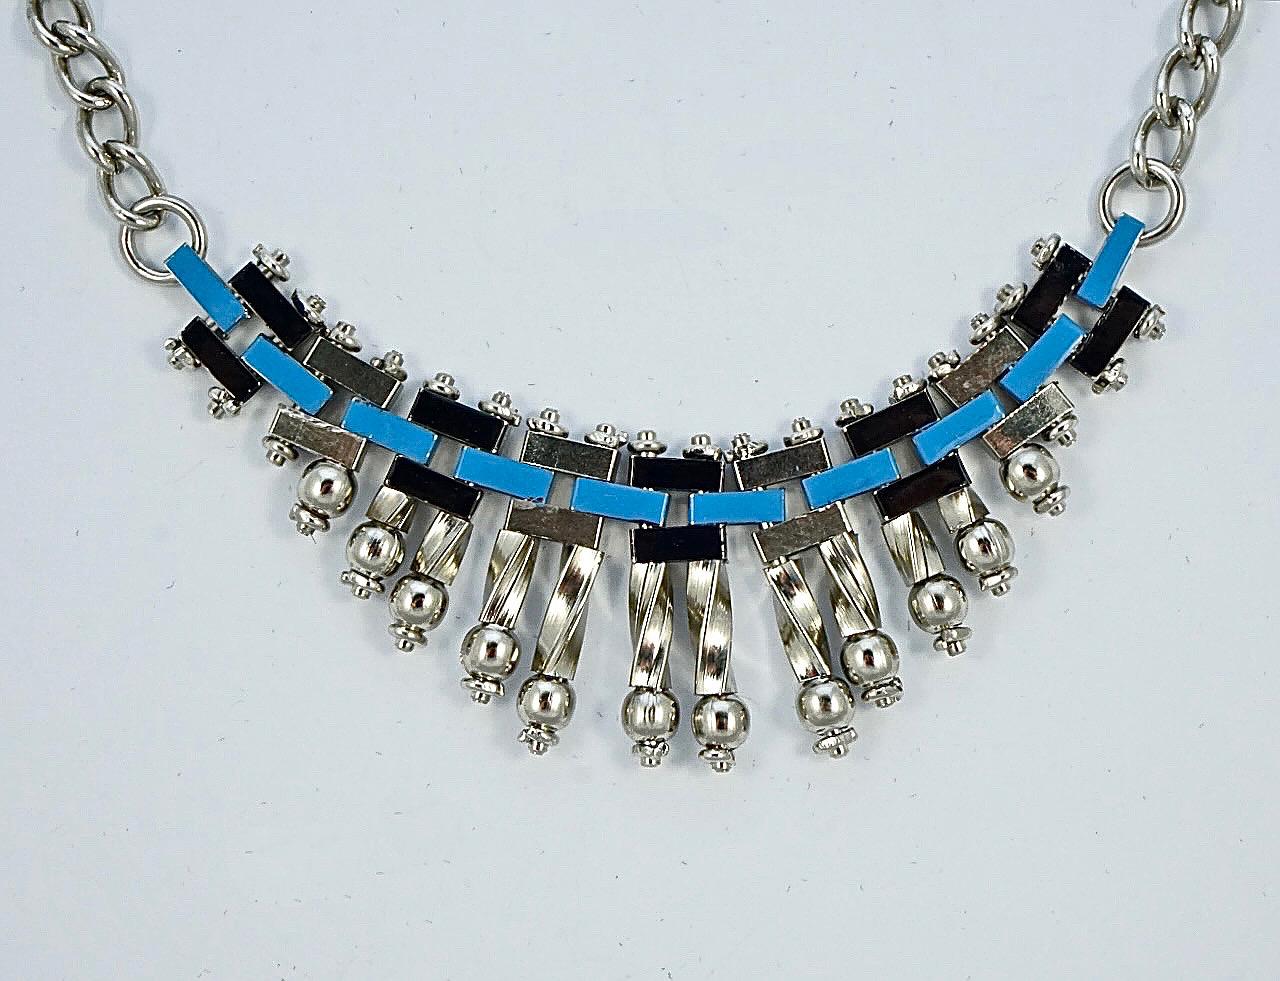 Wonderful Jakob Bengel Art Deco chrome plated necklace, featuring blue and black enamel painted brickwork links, and a twist and ball design. Measuring length 40.6 cm / 16 inches and the centrepiece is width 8.6 cm / 3.4 inches by drop 2.4 cm / .94